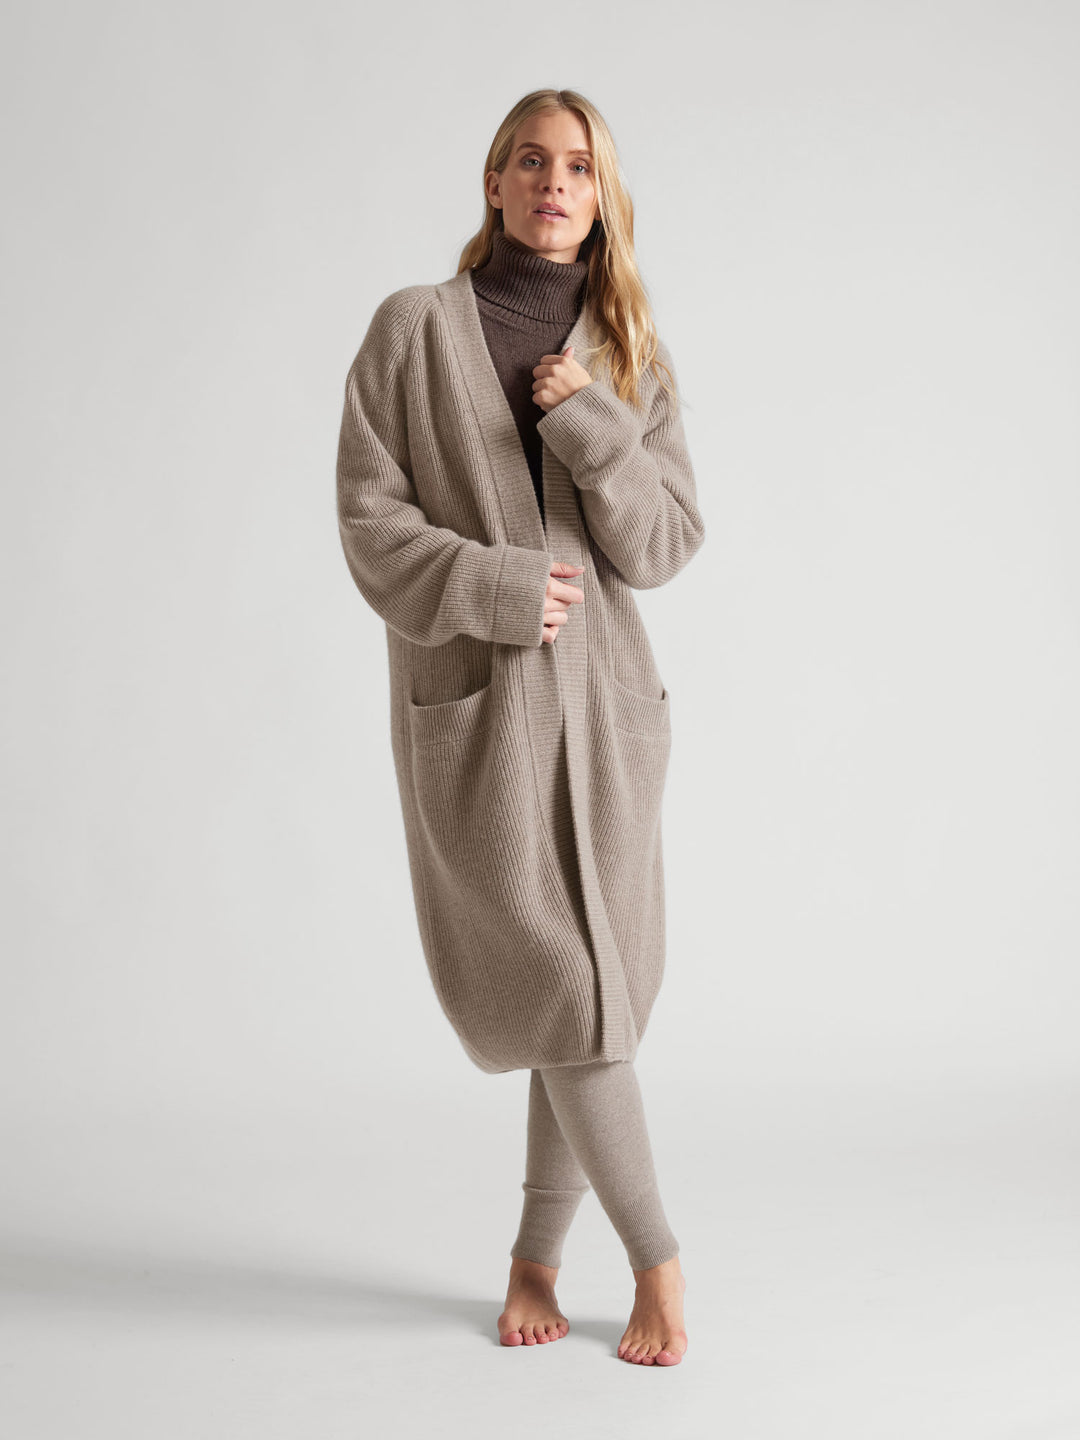 Rib knitted cashmere cardigan "Olea", in 100% pure cashmere. Color: Toast. Scandinavian design by Kashmina.